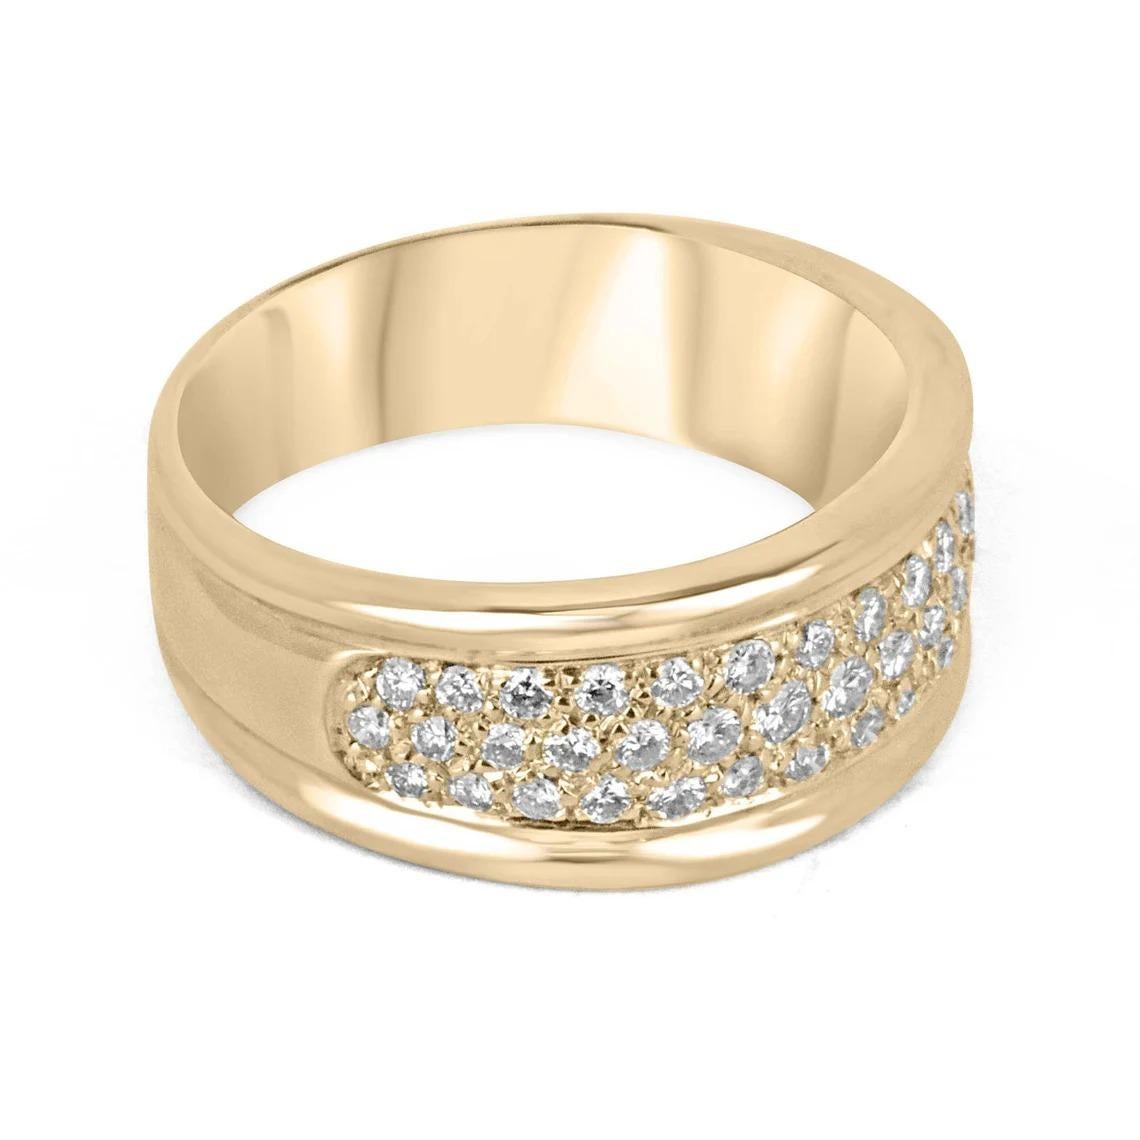 Introducing an exquisite ladies' diamond ring showcasing a dazzling full diamond cluster with a total carat weight of half a carat. The brilliant round-cut diamonds radiate elegance and sparkle, creating a breathtaking display of brilliance and